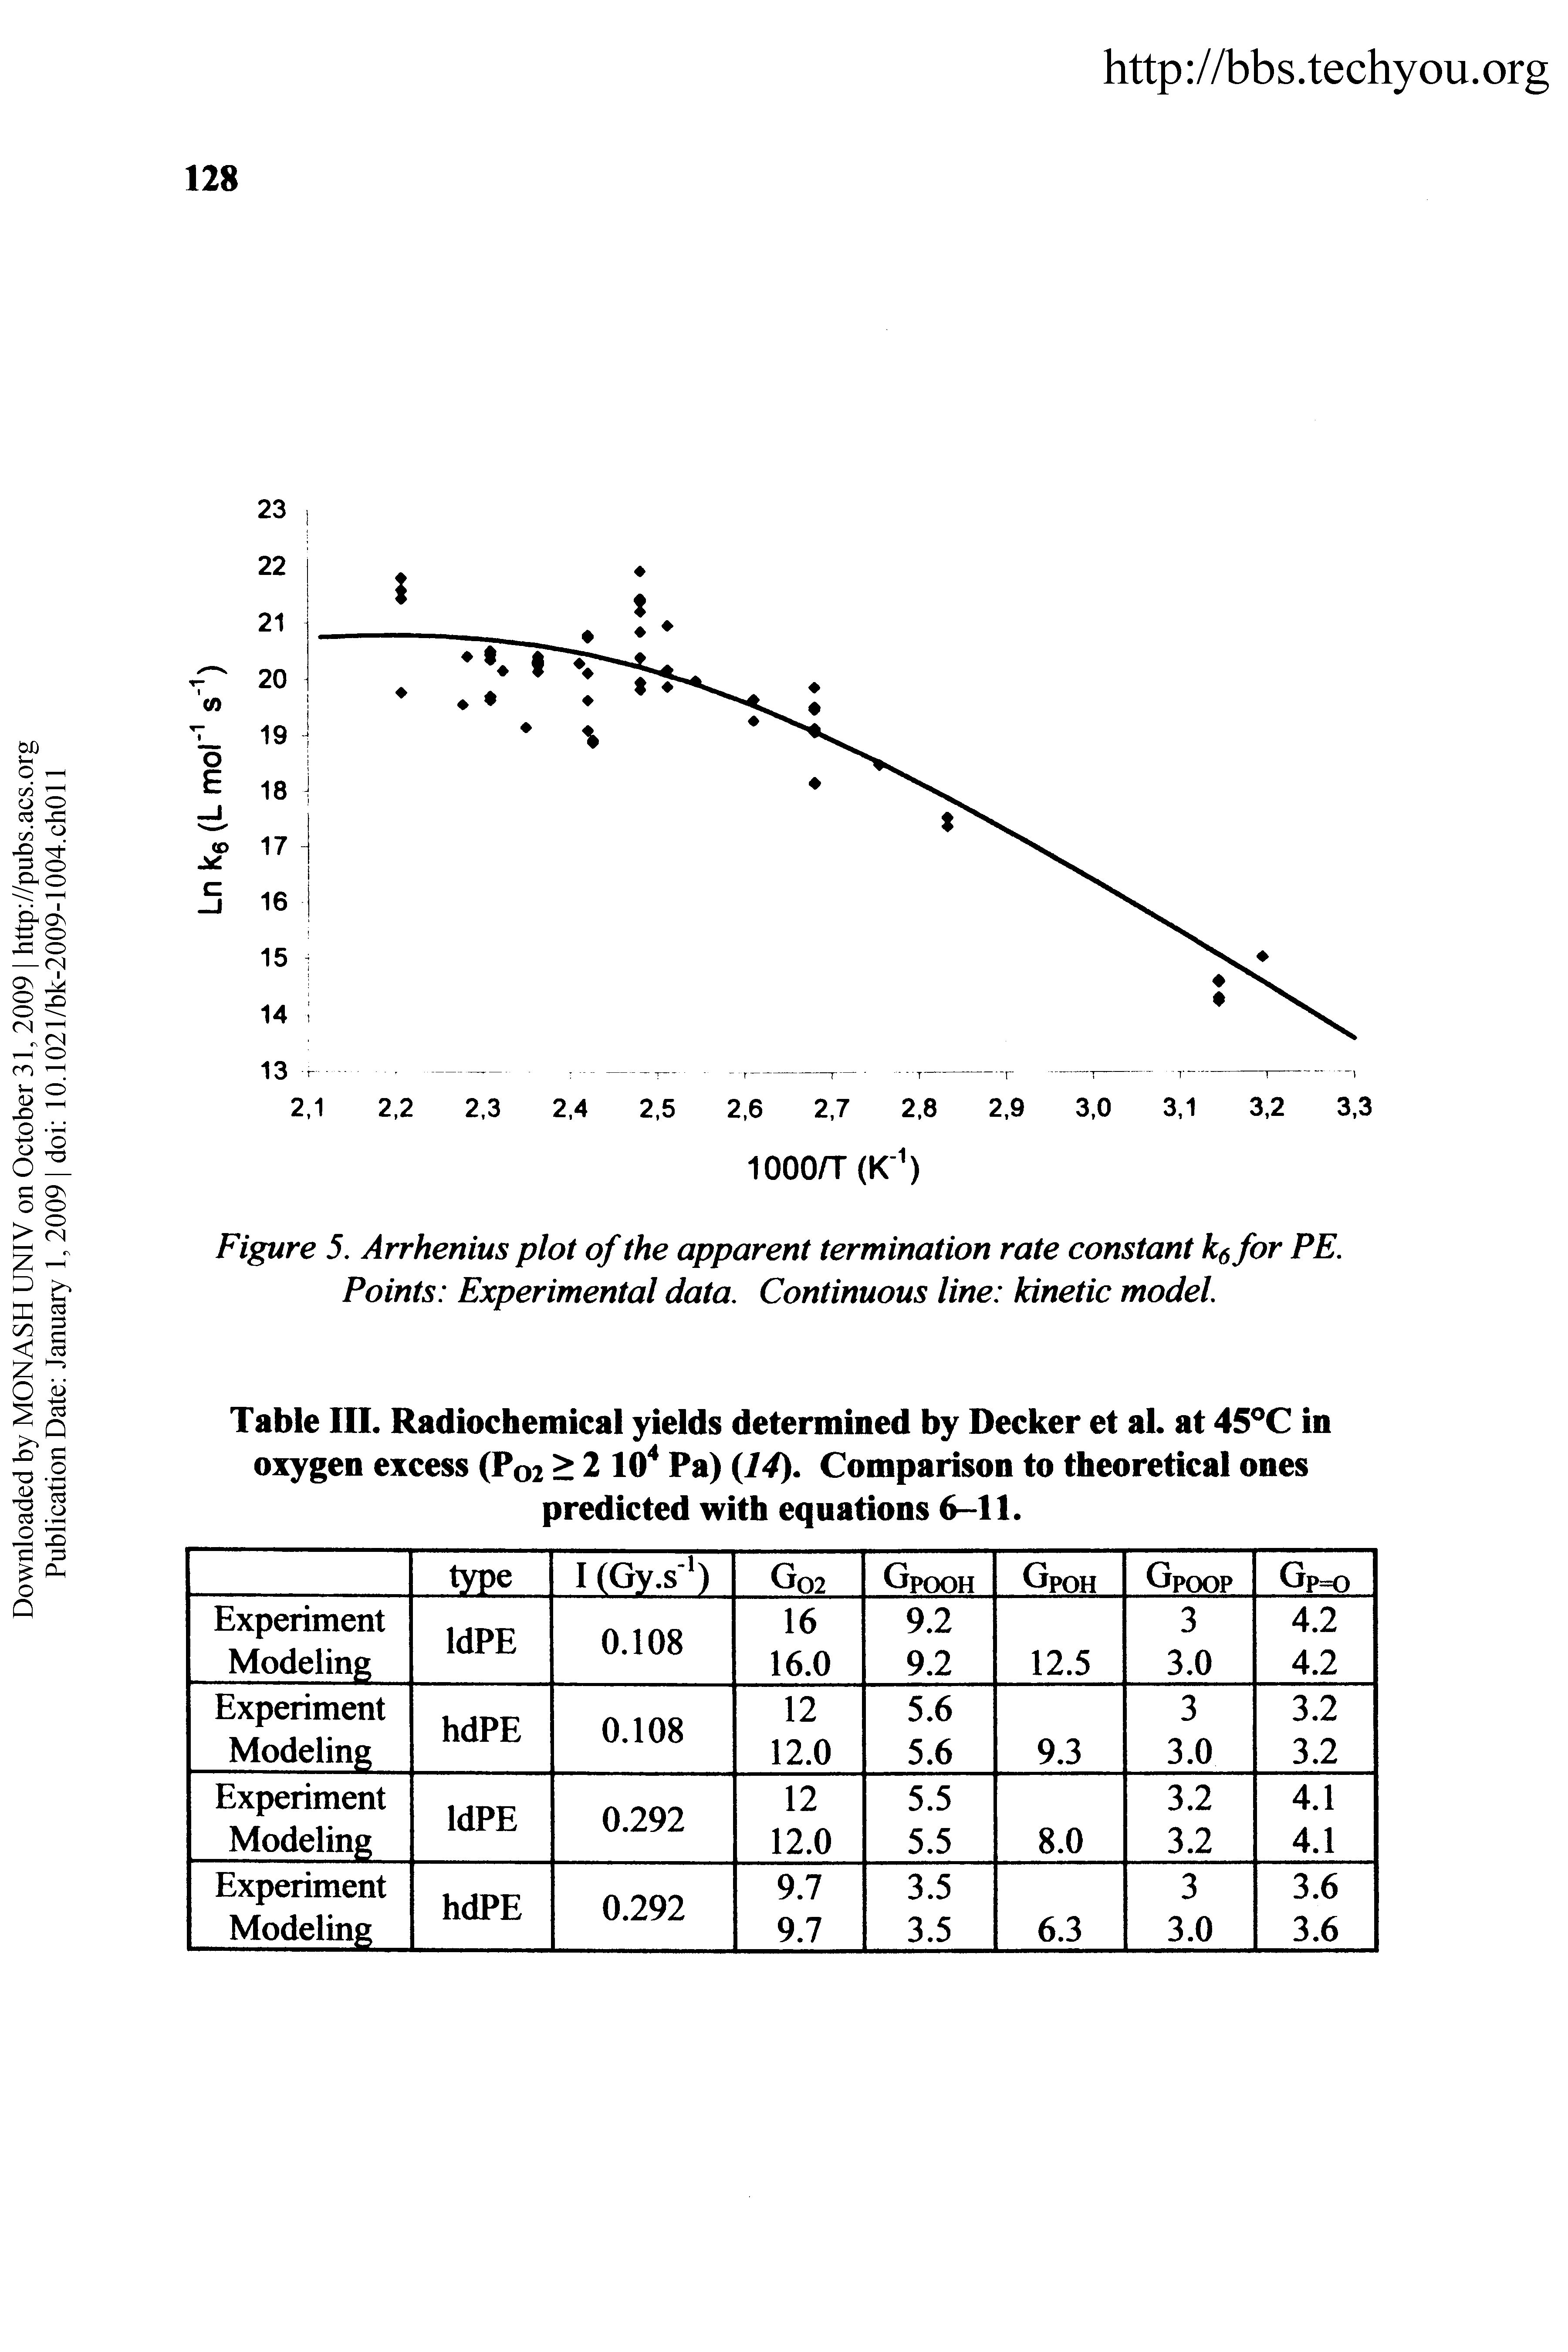 Table III. Radiochemical yields determined by Decker et al. at 45 C in oxygen excess (P02 > 2 lO Pa) 14). Comparison to theoretical ones predicted with equations 6-11.